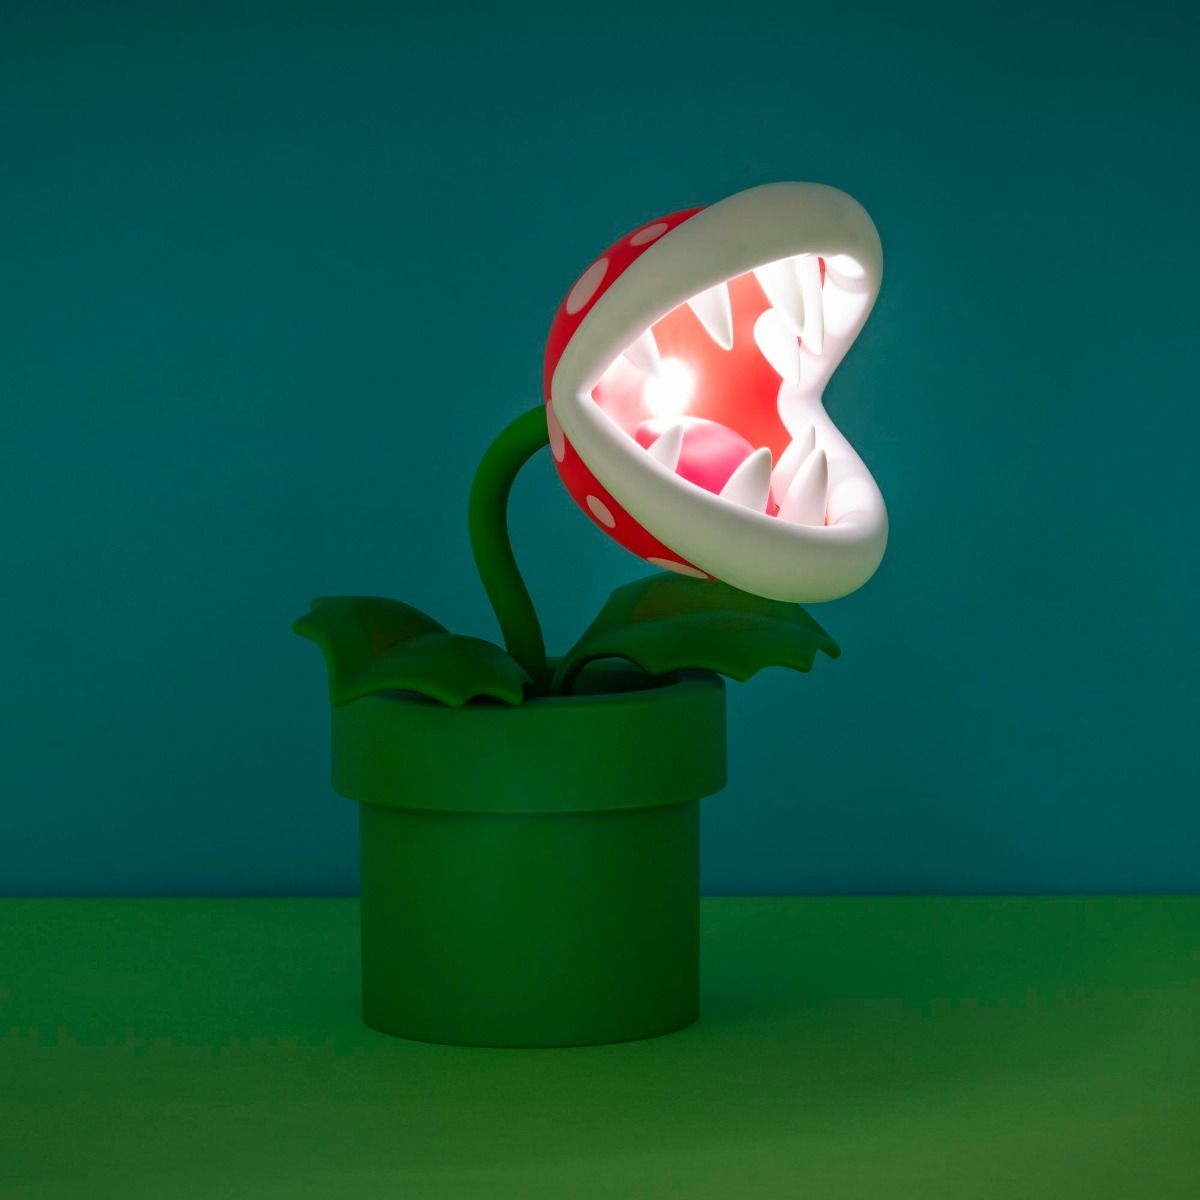 Snap Up This New Super Mario Piranha Poseable Lamp At Merchoid | The  GoNintendo Archives | GoNintendo